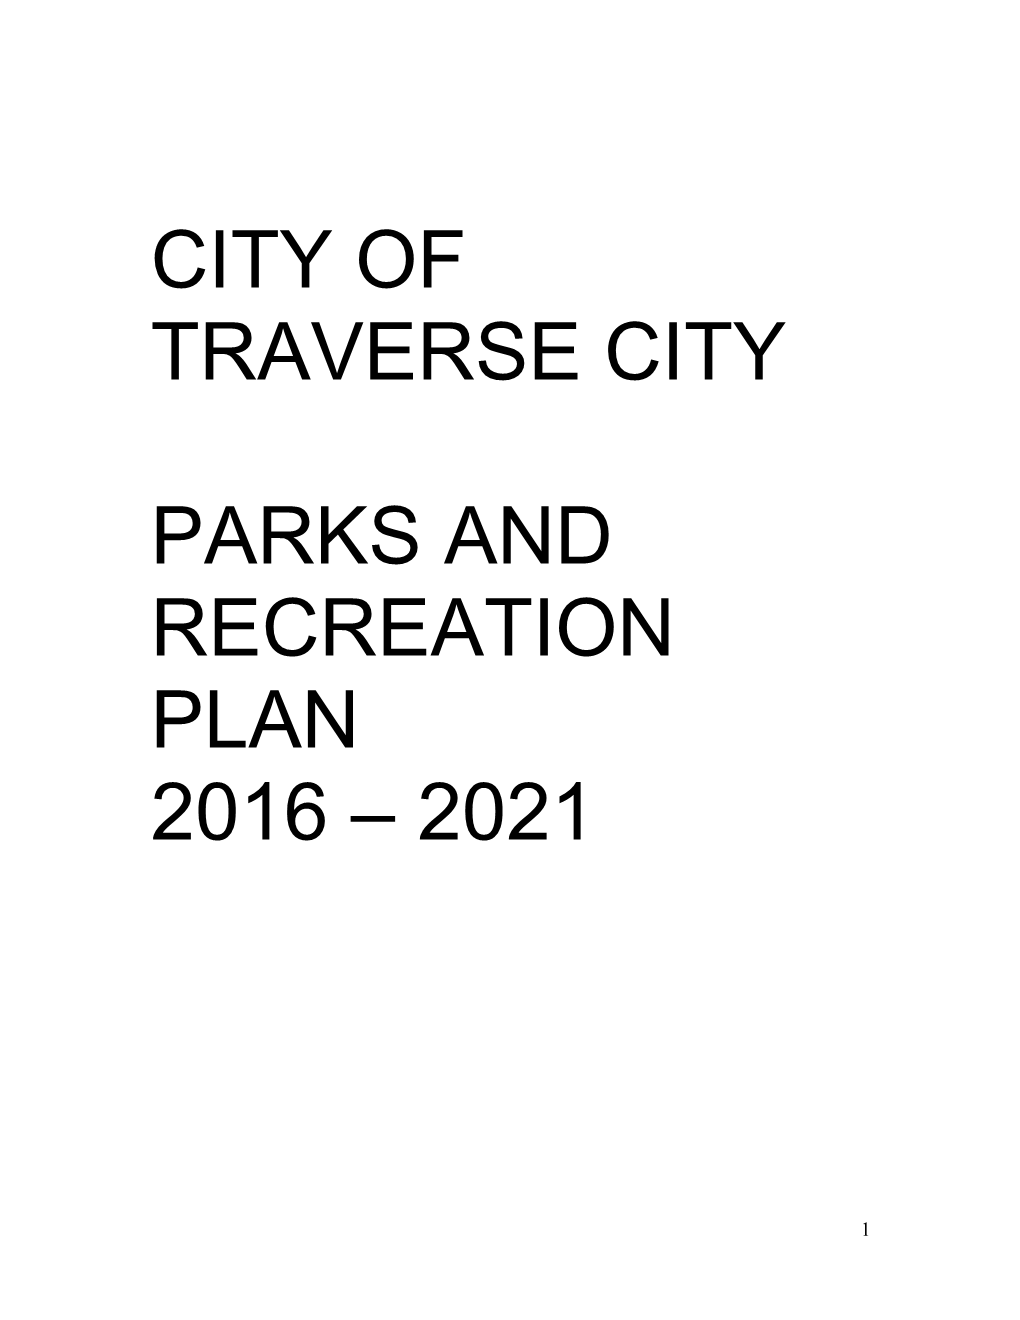 City of Traverse City Parks and Recreation Plan 2016